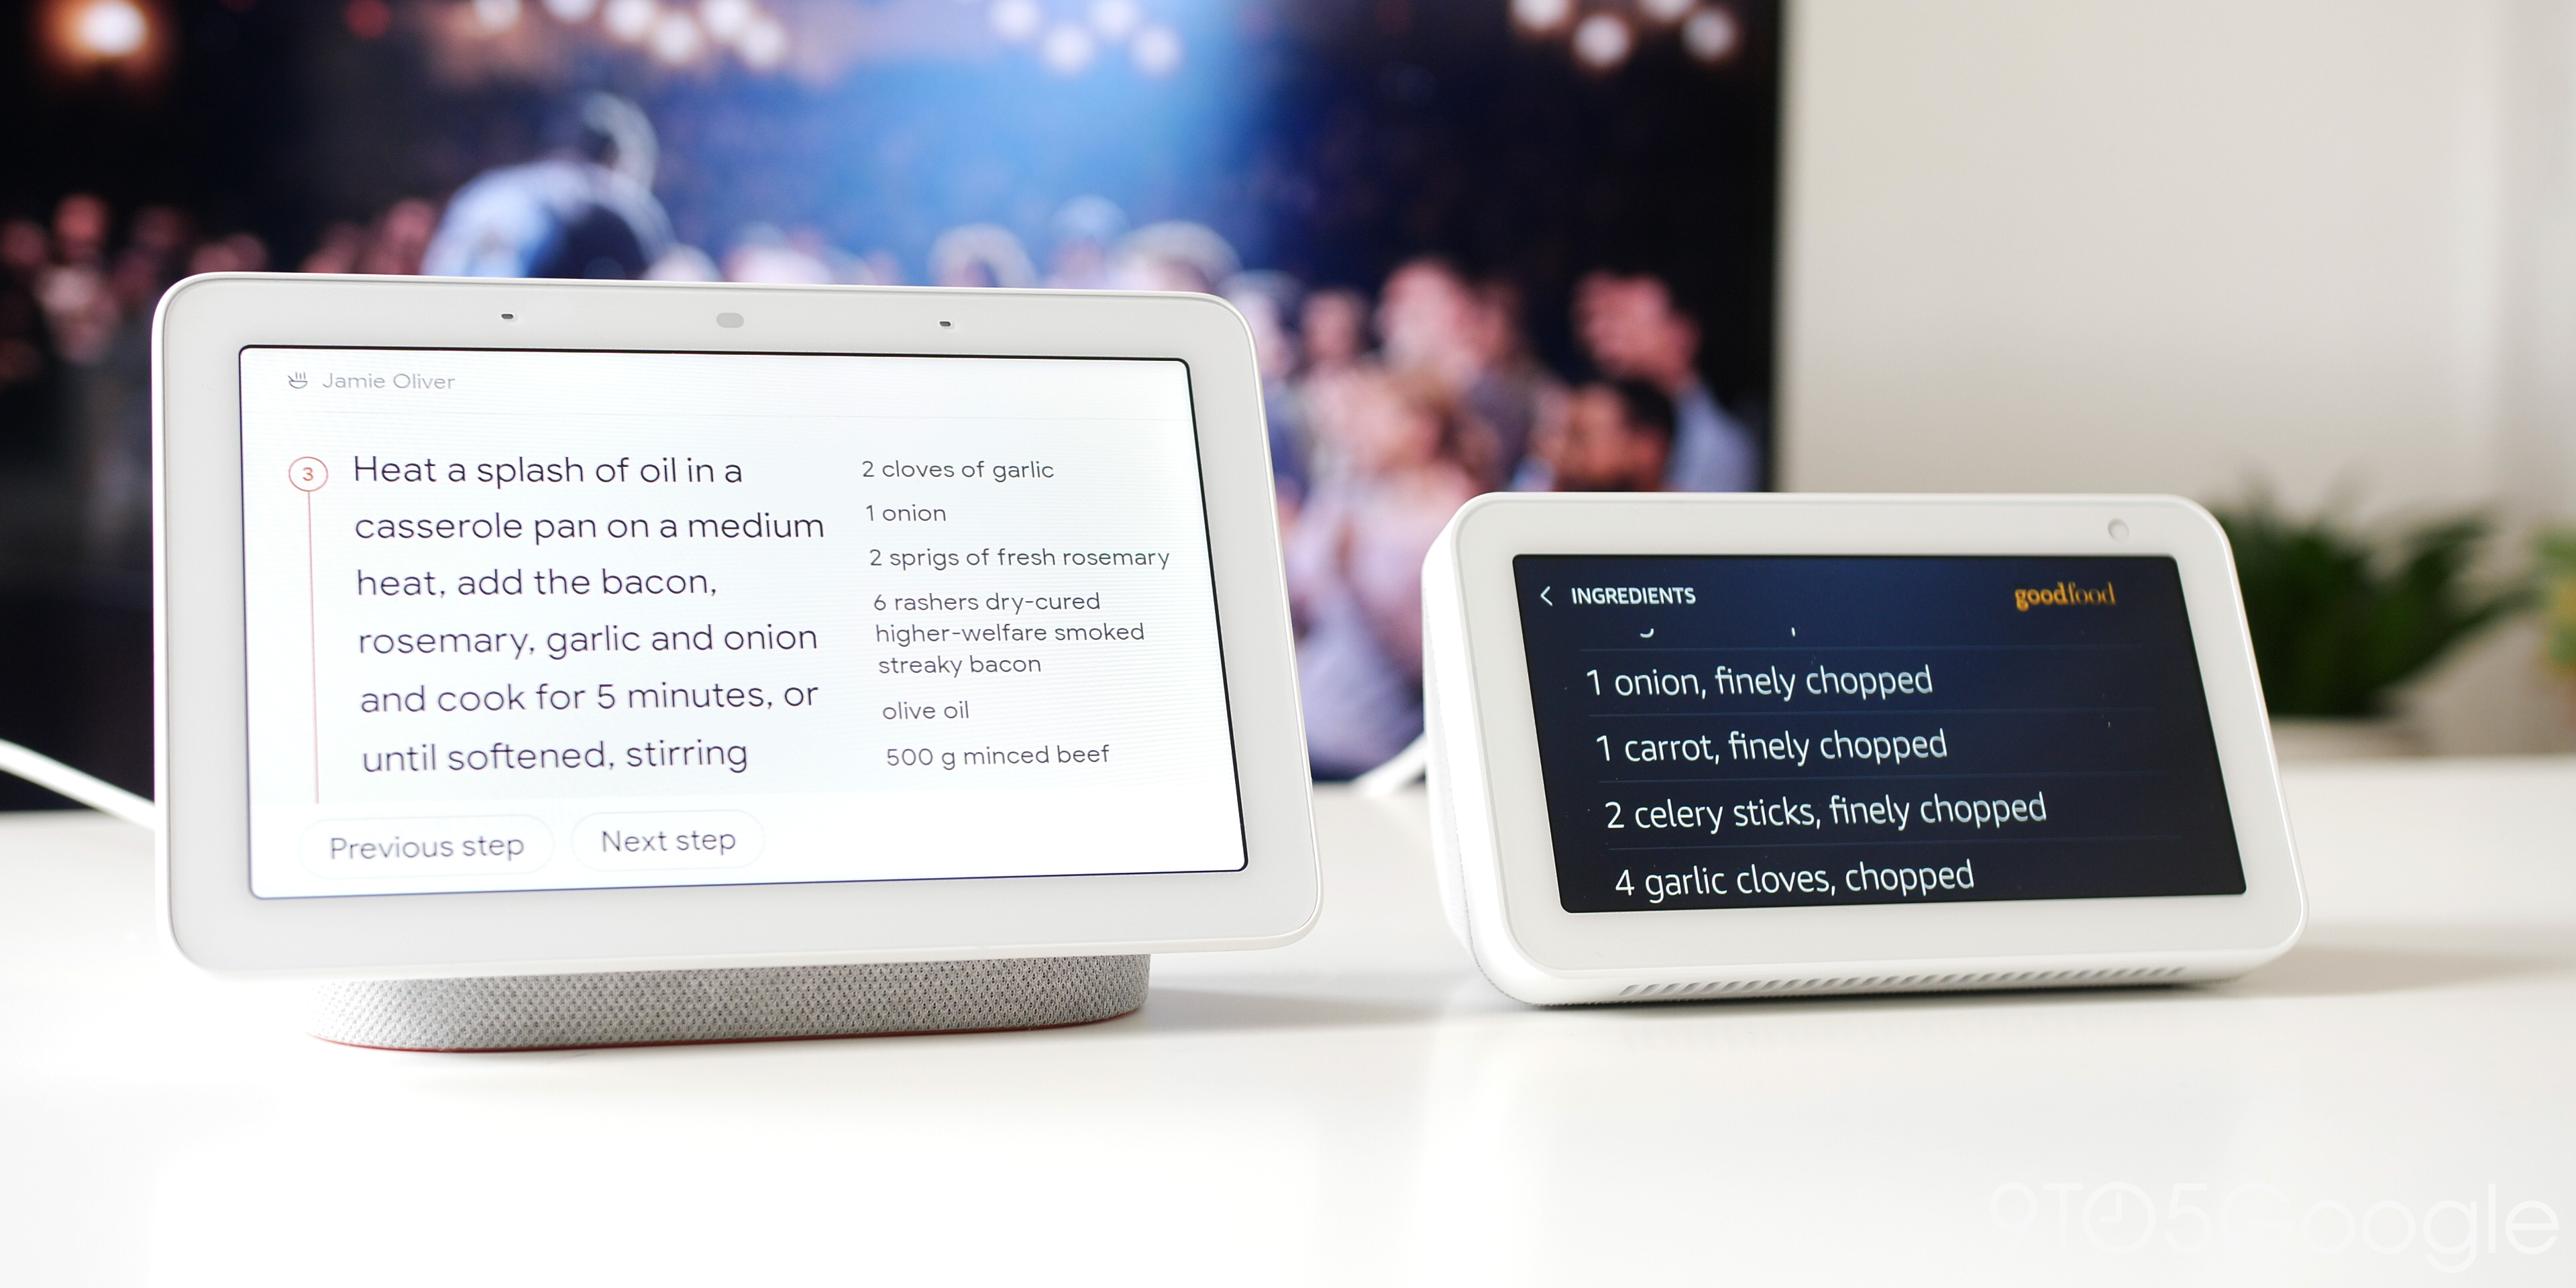 Echo Show vs. Google Nest Hub: What's The Difference, Is One Better? -  History-Computer